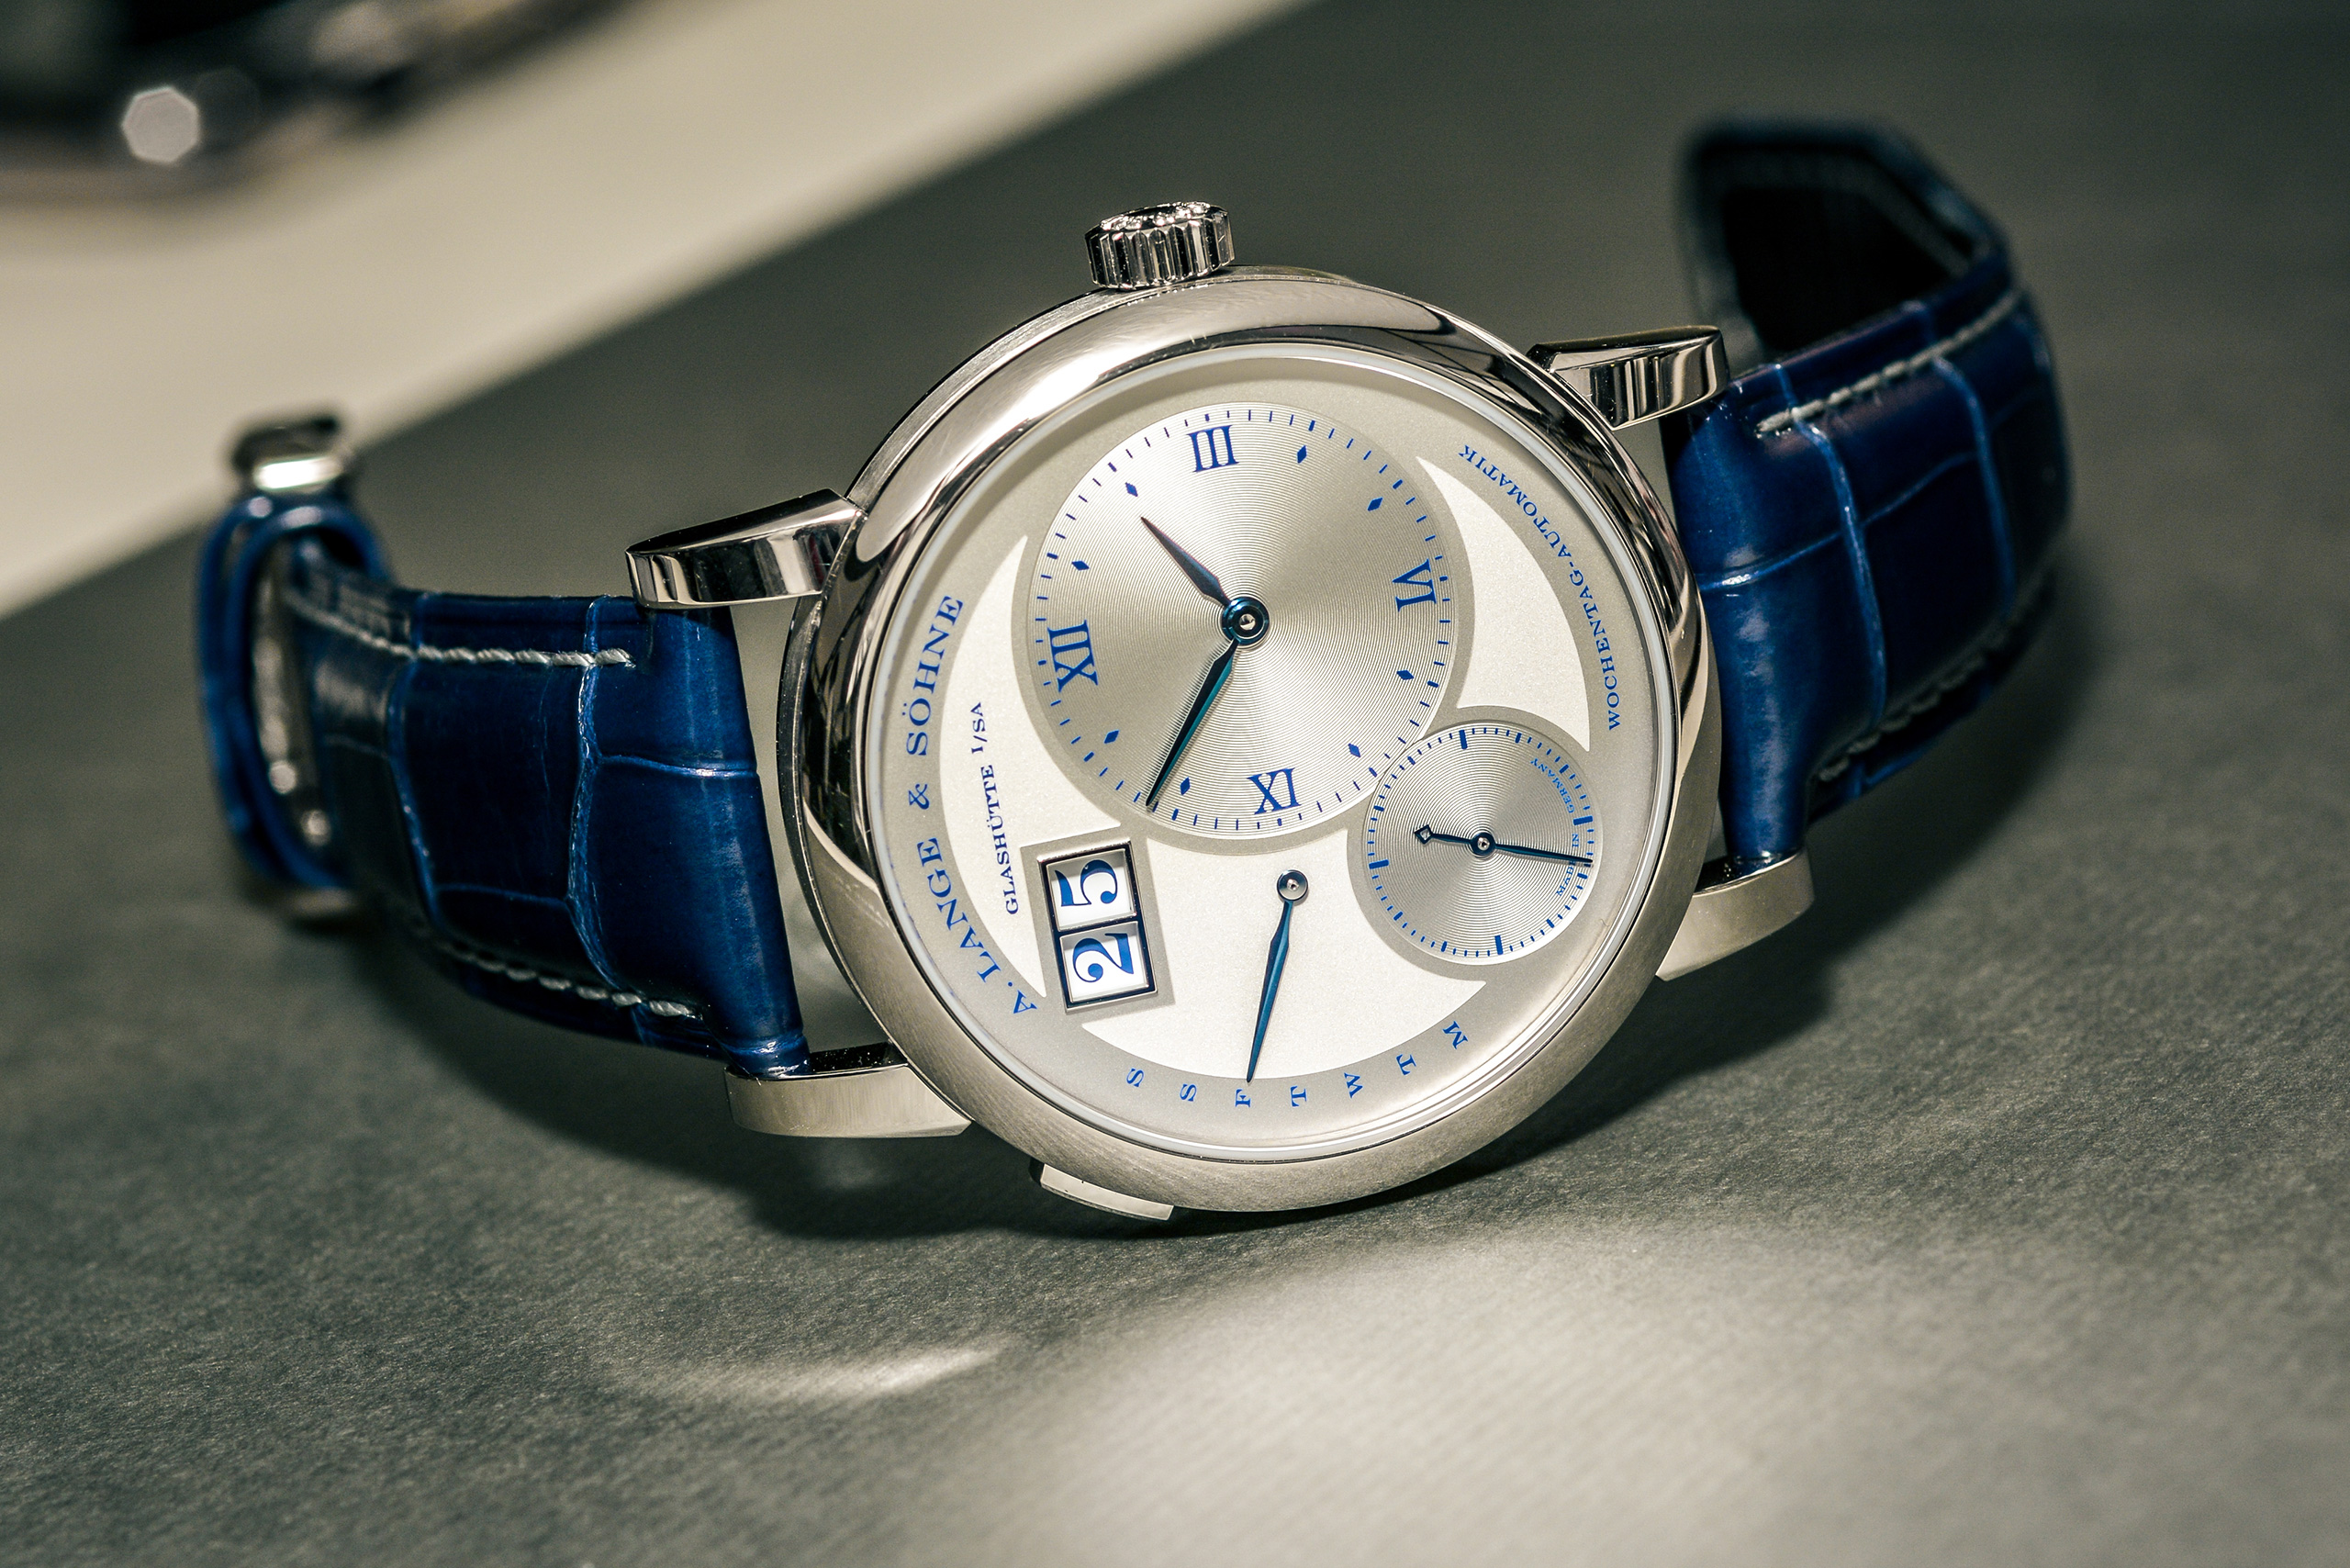 The 18k white gold copy watch has silvery dial.